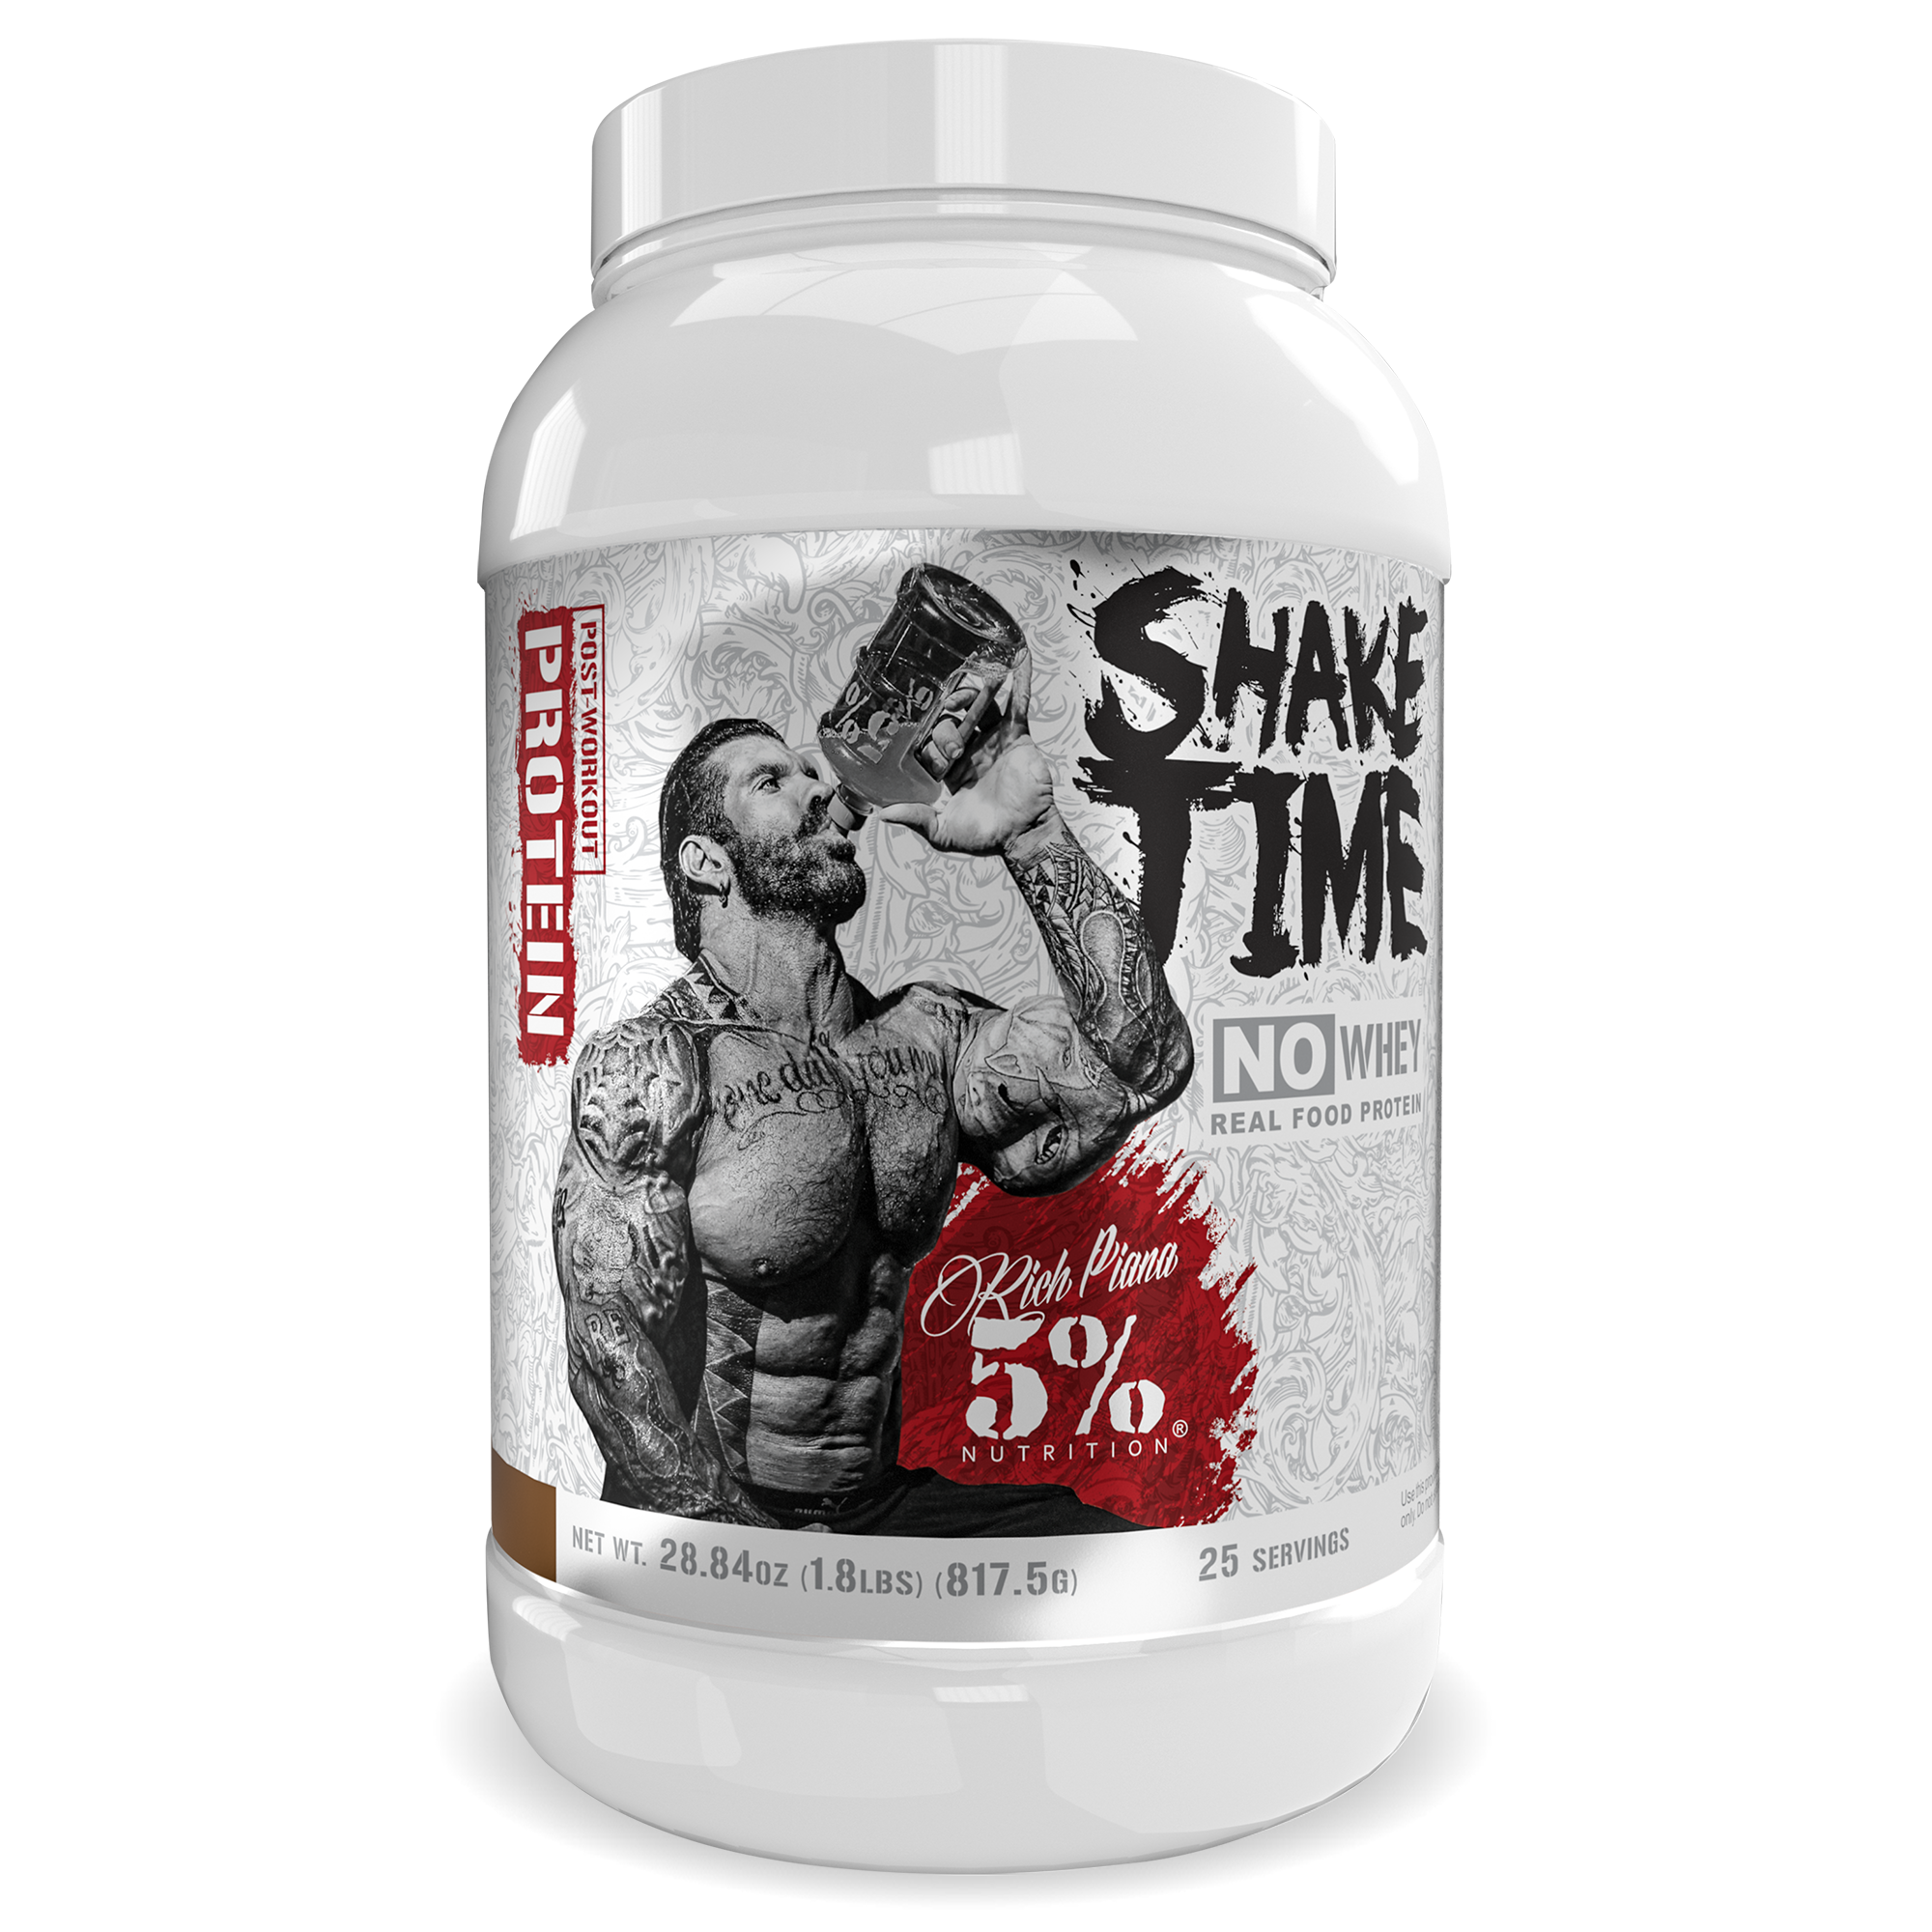 5%n Nutrition - Shake Time Real Food Protein